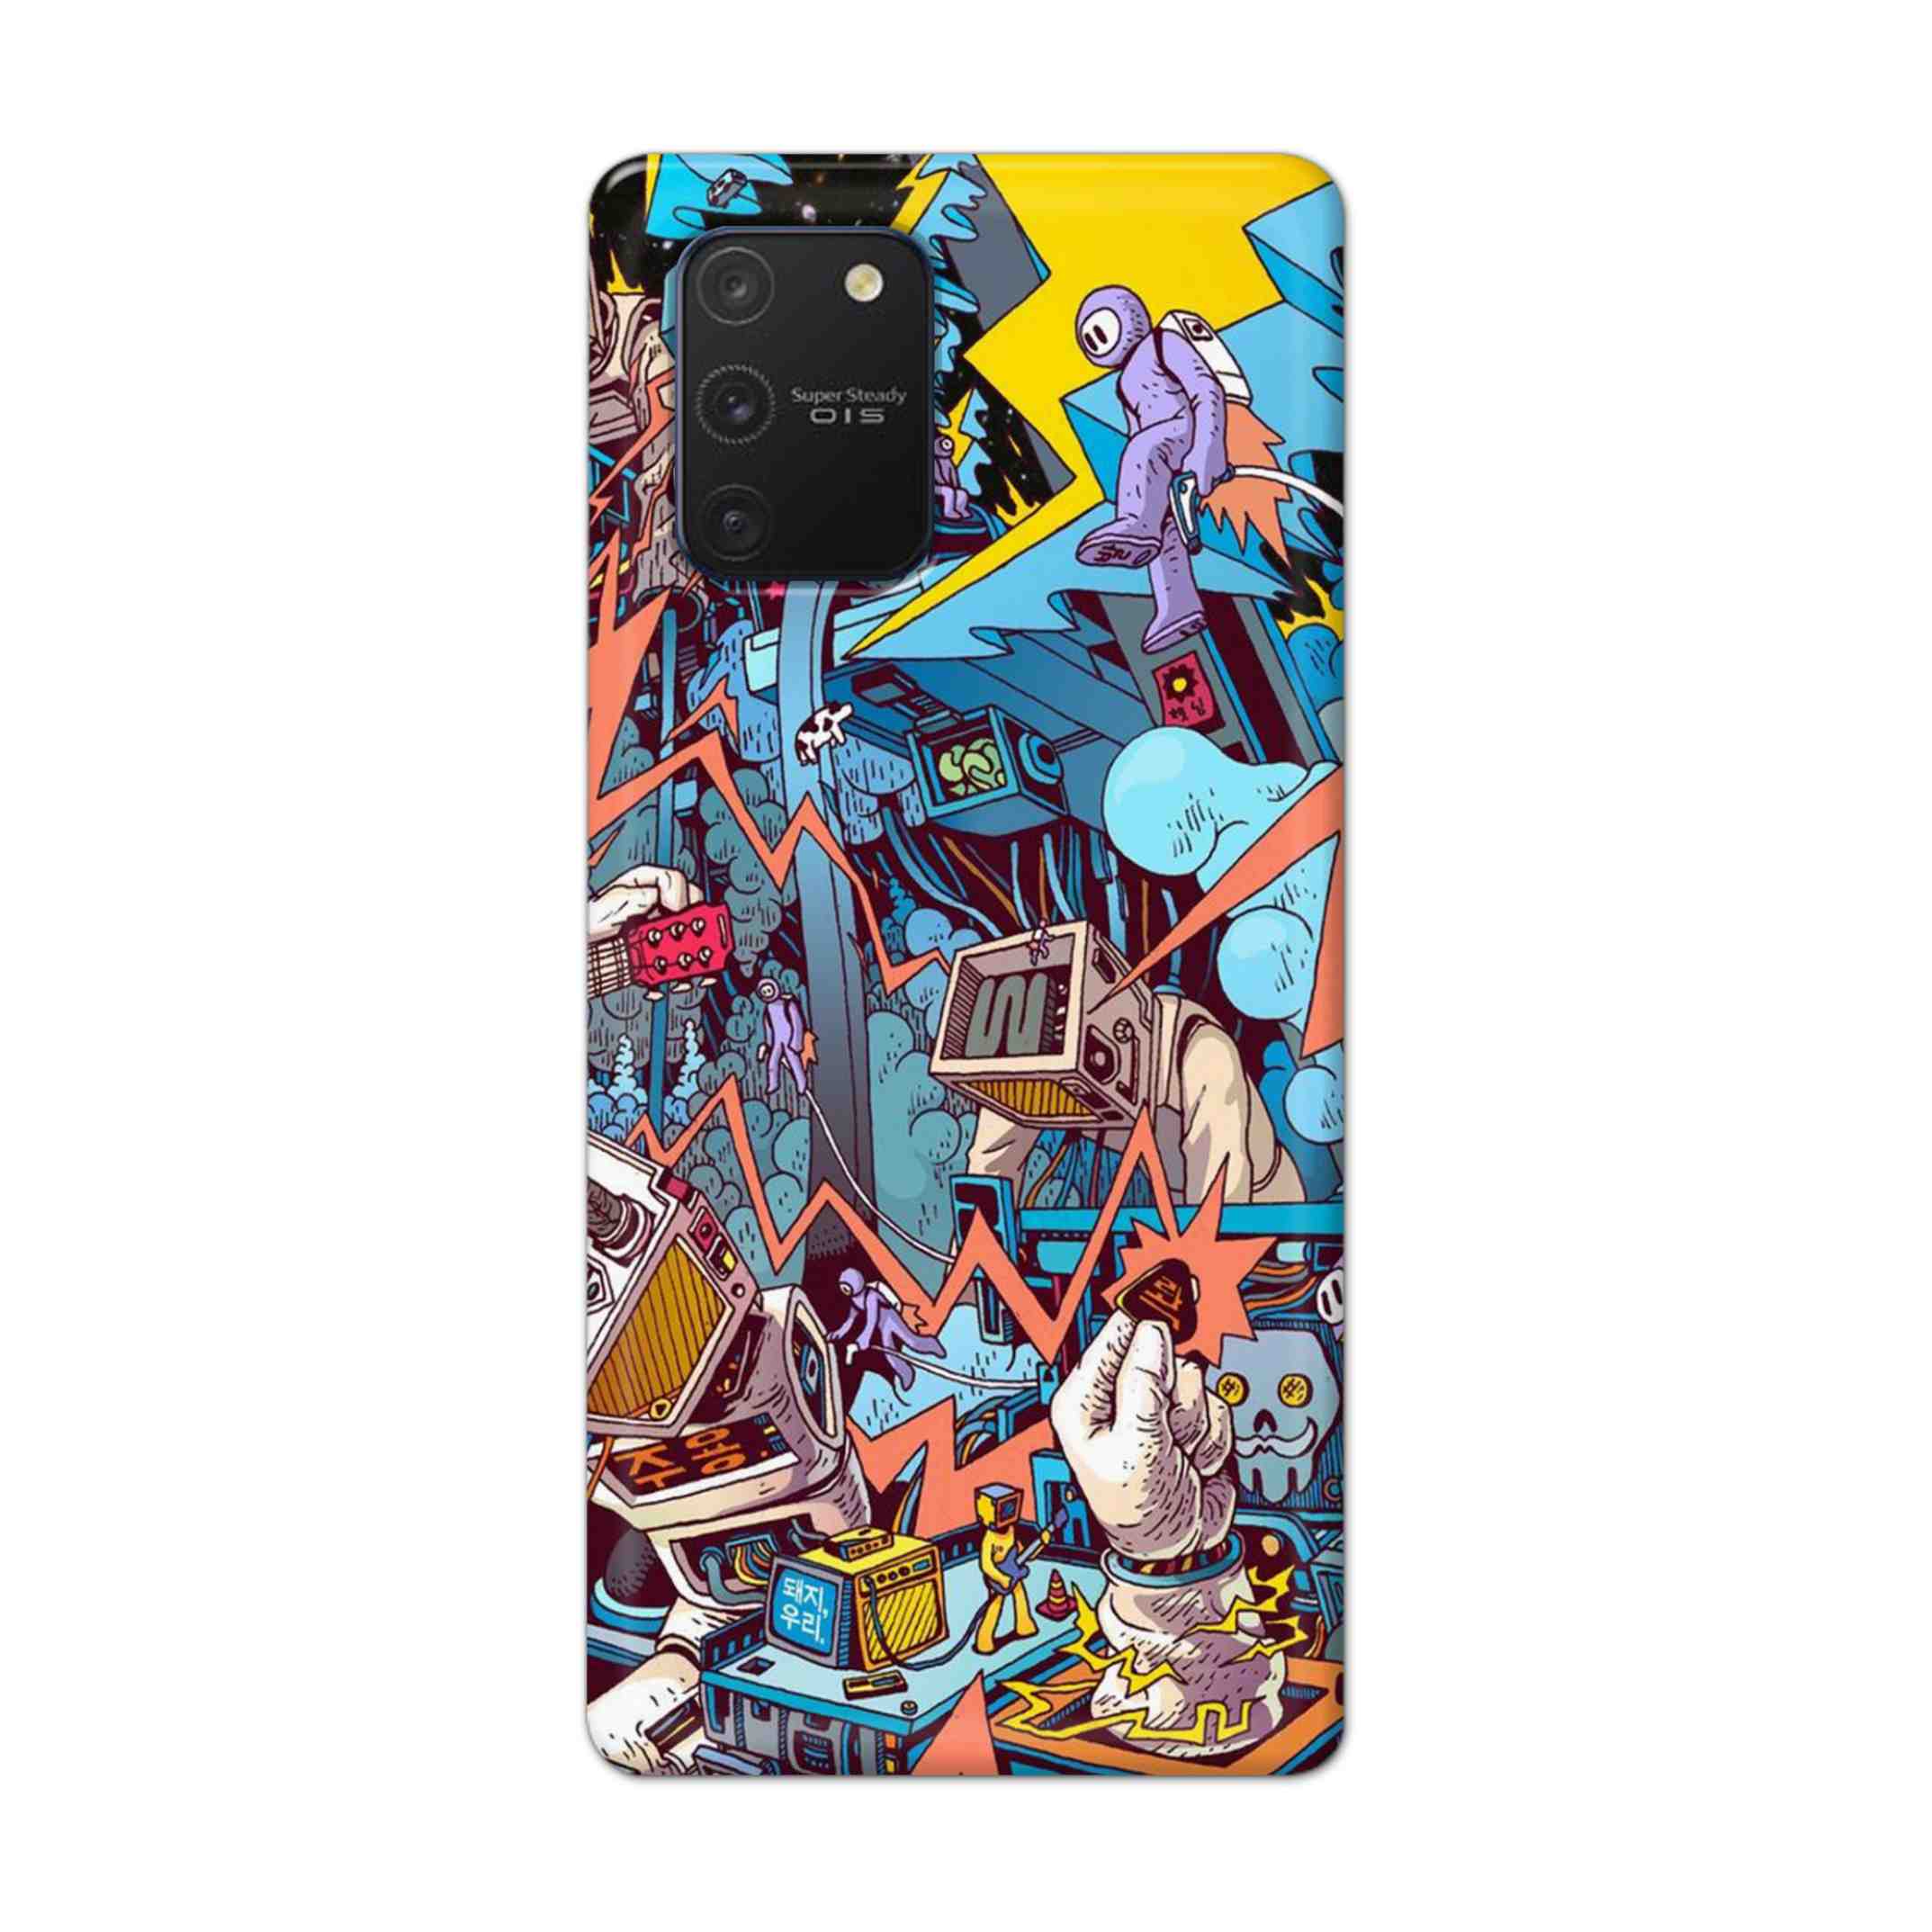 Buy Ofo Panic Hard Back Mobile Phone Case Cover For Samsung Galaxy Note 10 Lite (NEW) Online